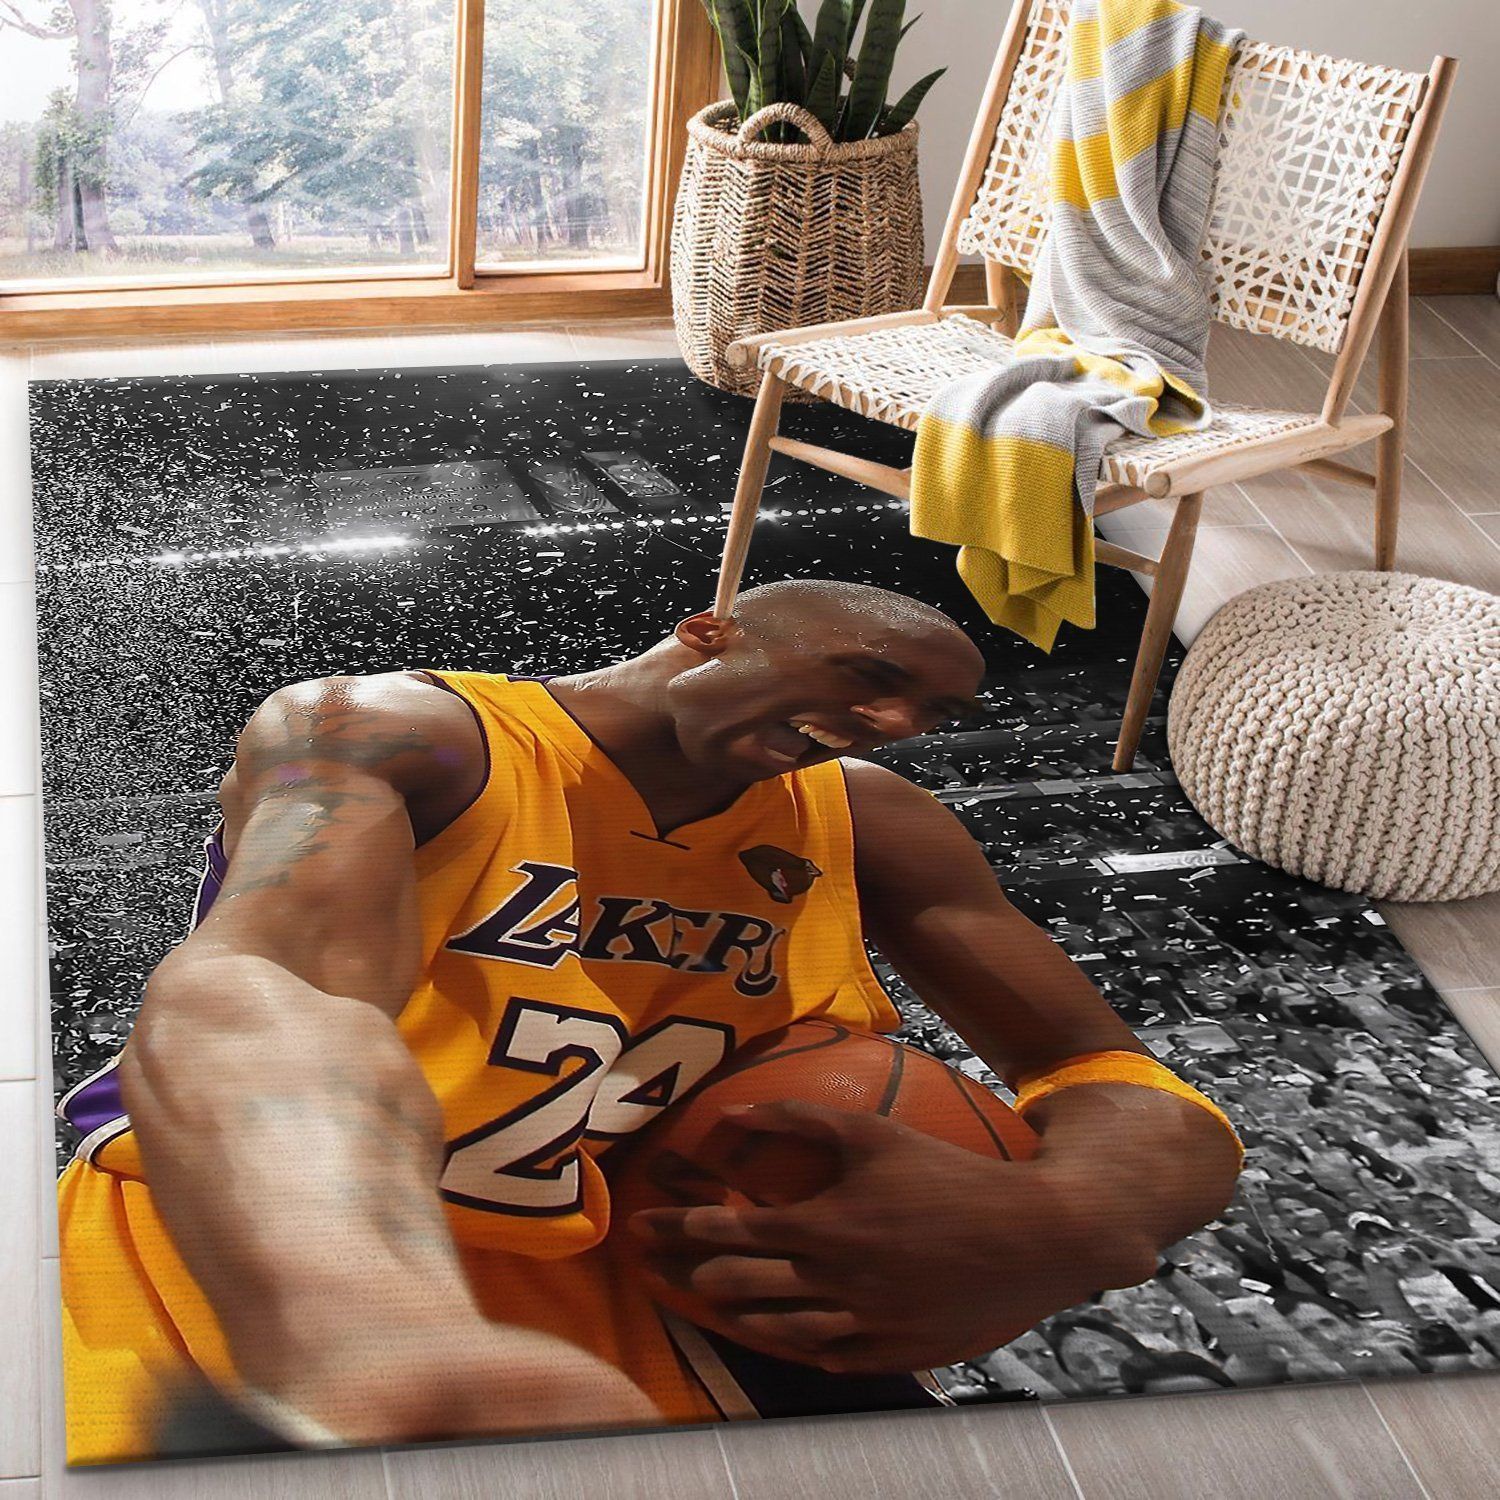 Kobe Bryant Legend 24 Lakers Area Rug Rugs For Living Room Rug Home Decor - Indoor Outdoor Rugs